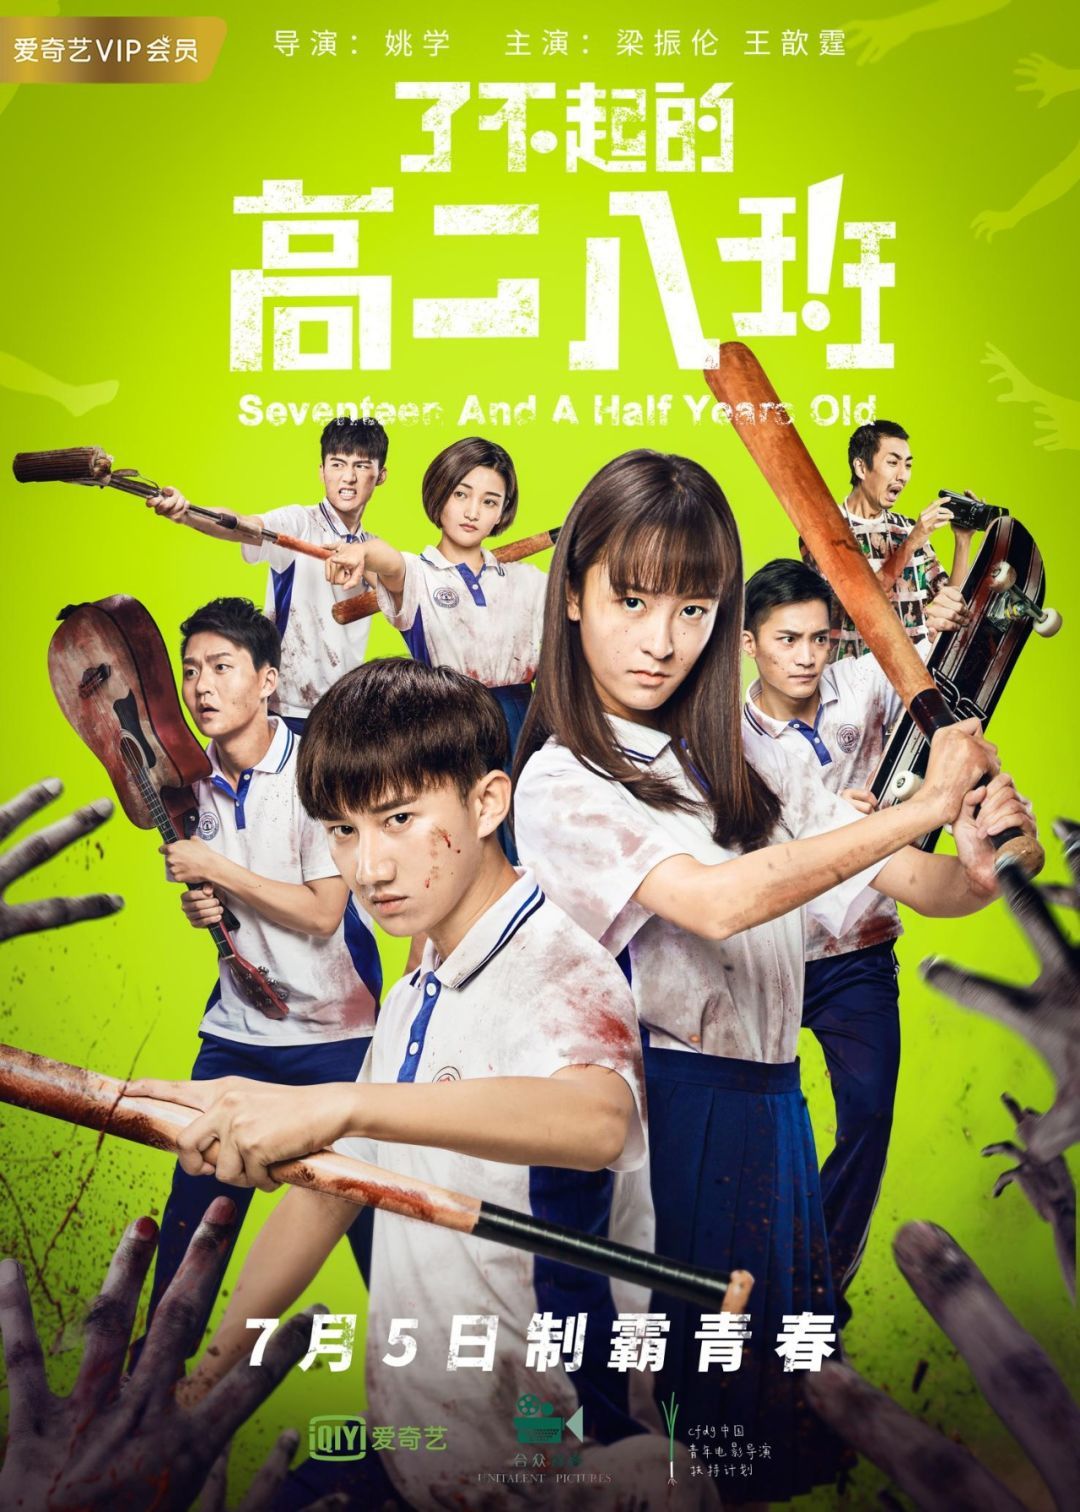 Poster Phim Lớp 11A8 Tài Ba (Seventeen And a Half Year Old)